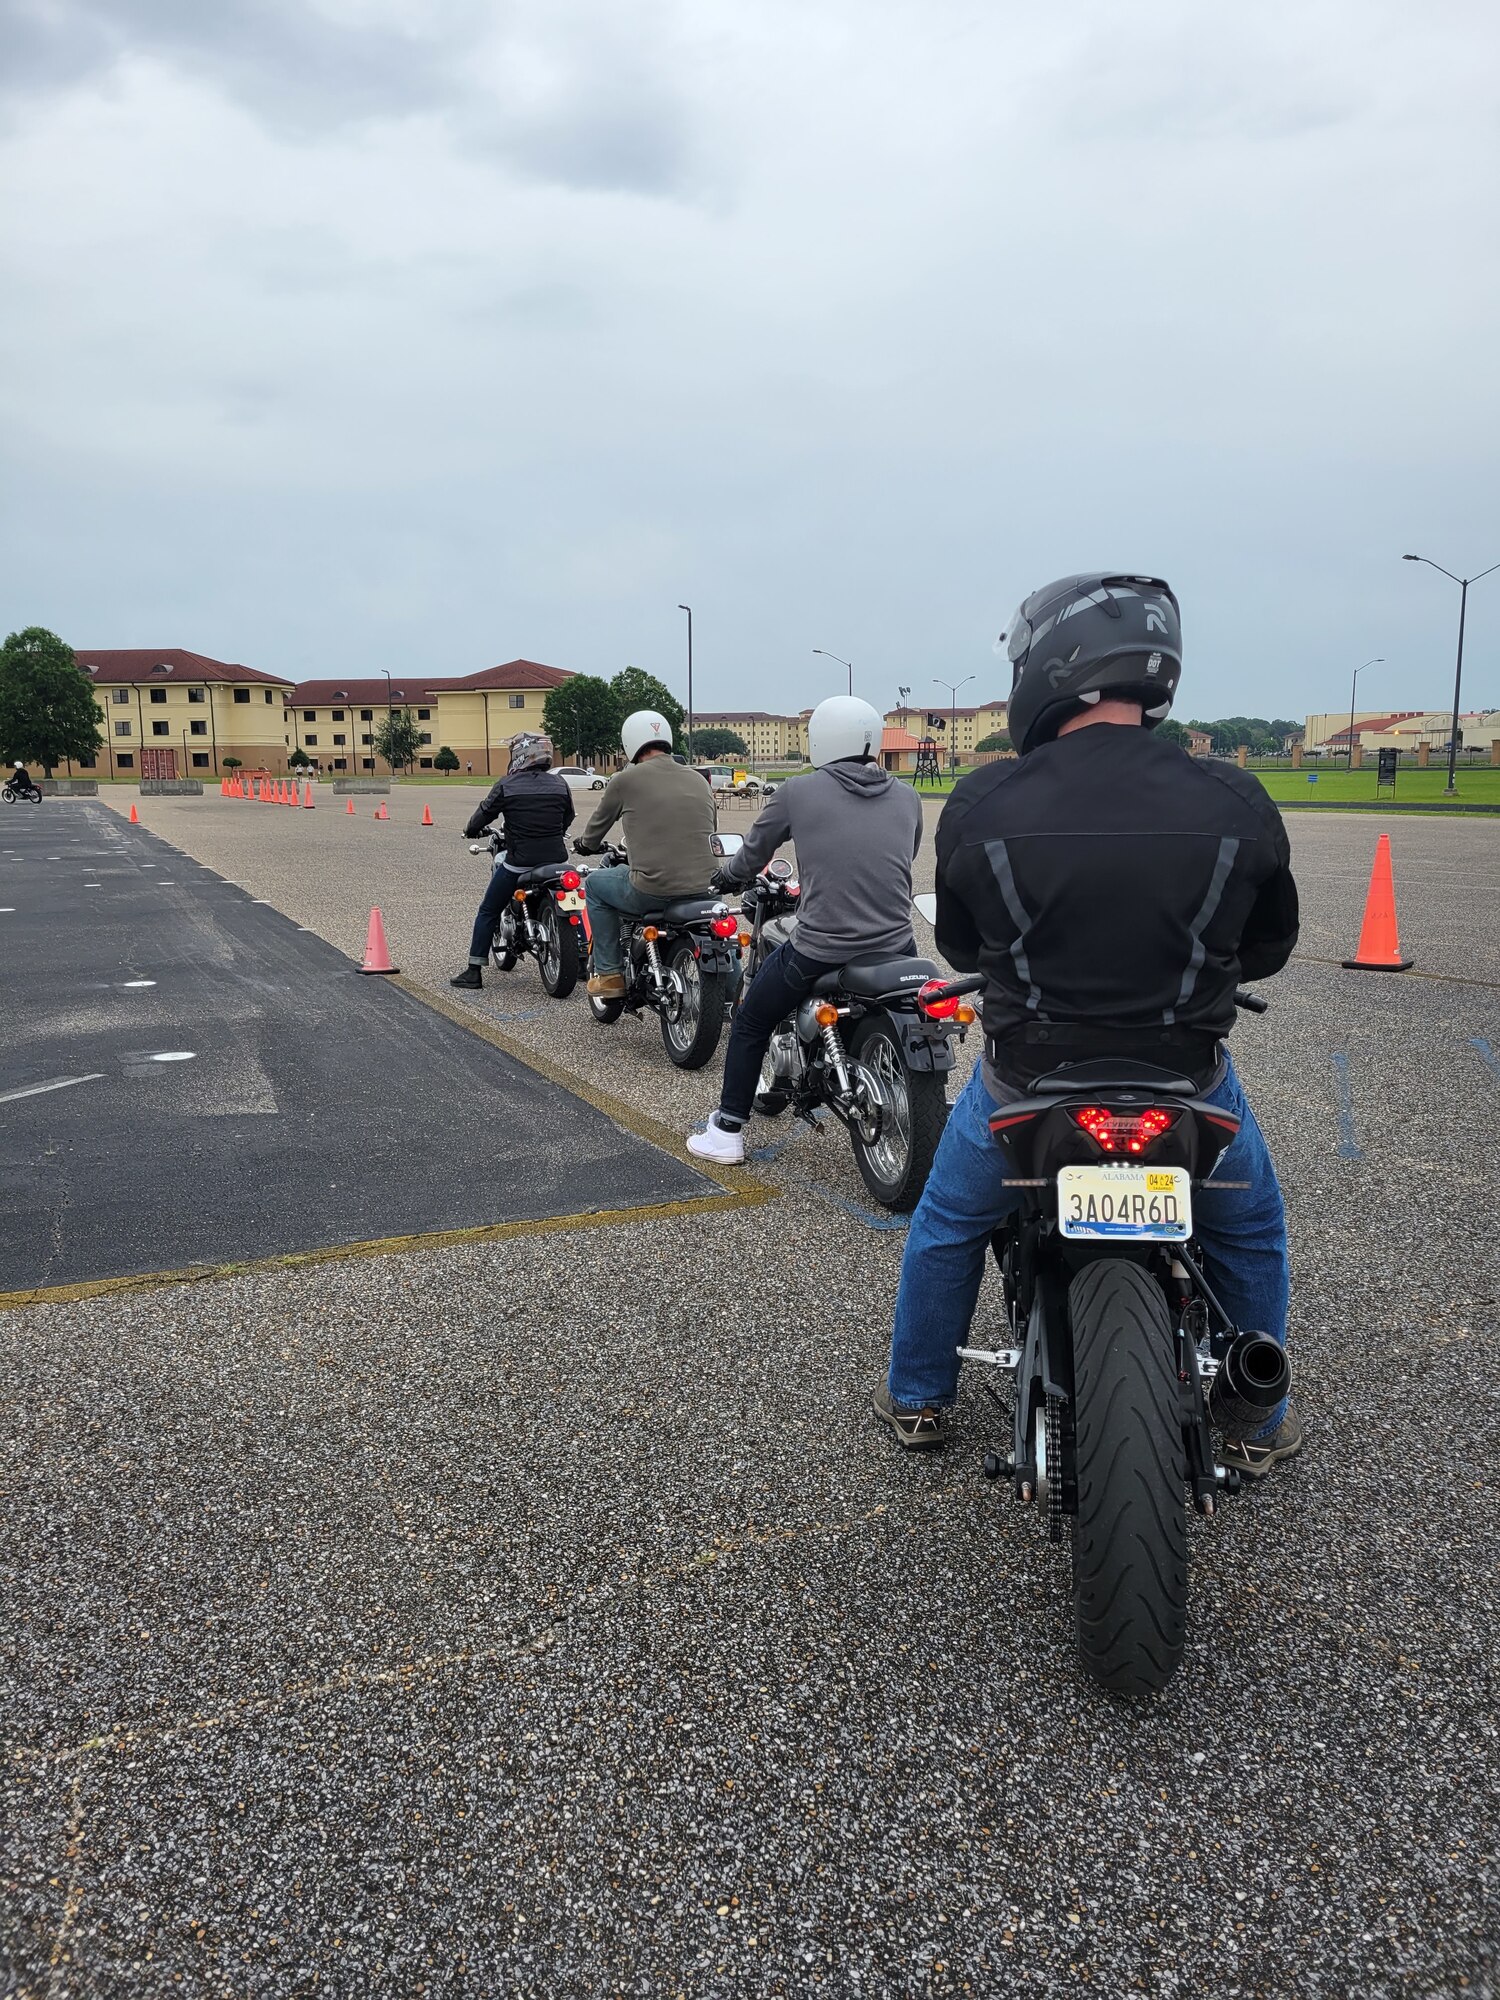 May is Motorcycle Safety Month, and the installation is reflecting on recent losses due to private motor vehicle accidents. One strategy to consider is the Search, Evaluate and Execute strategy which can help both motorcyclists and motorists avoid accidents that can result in fatalities.